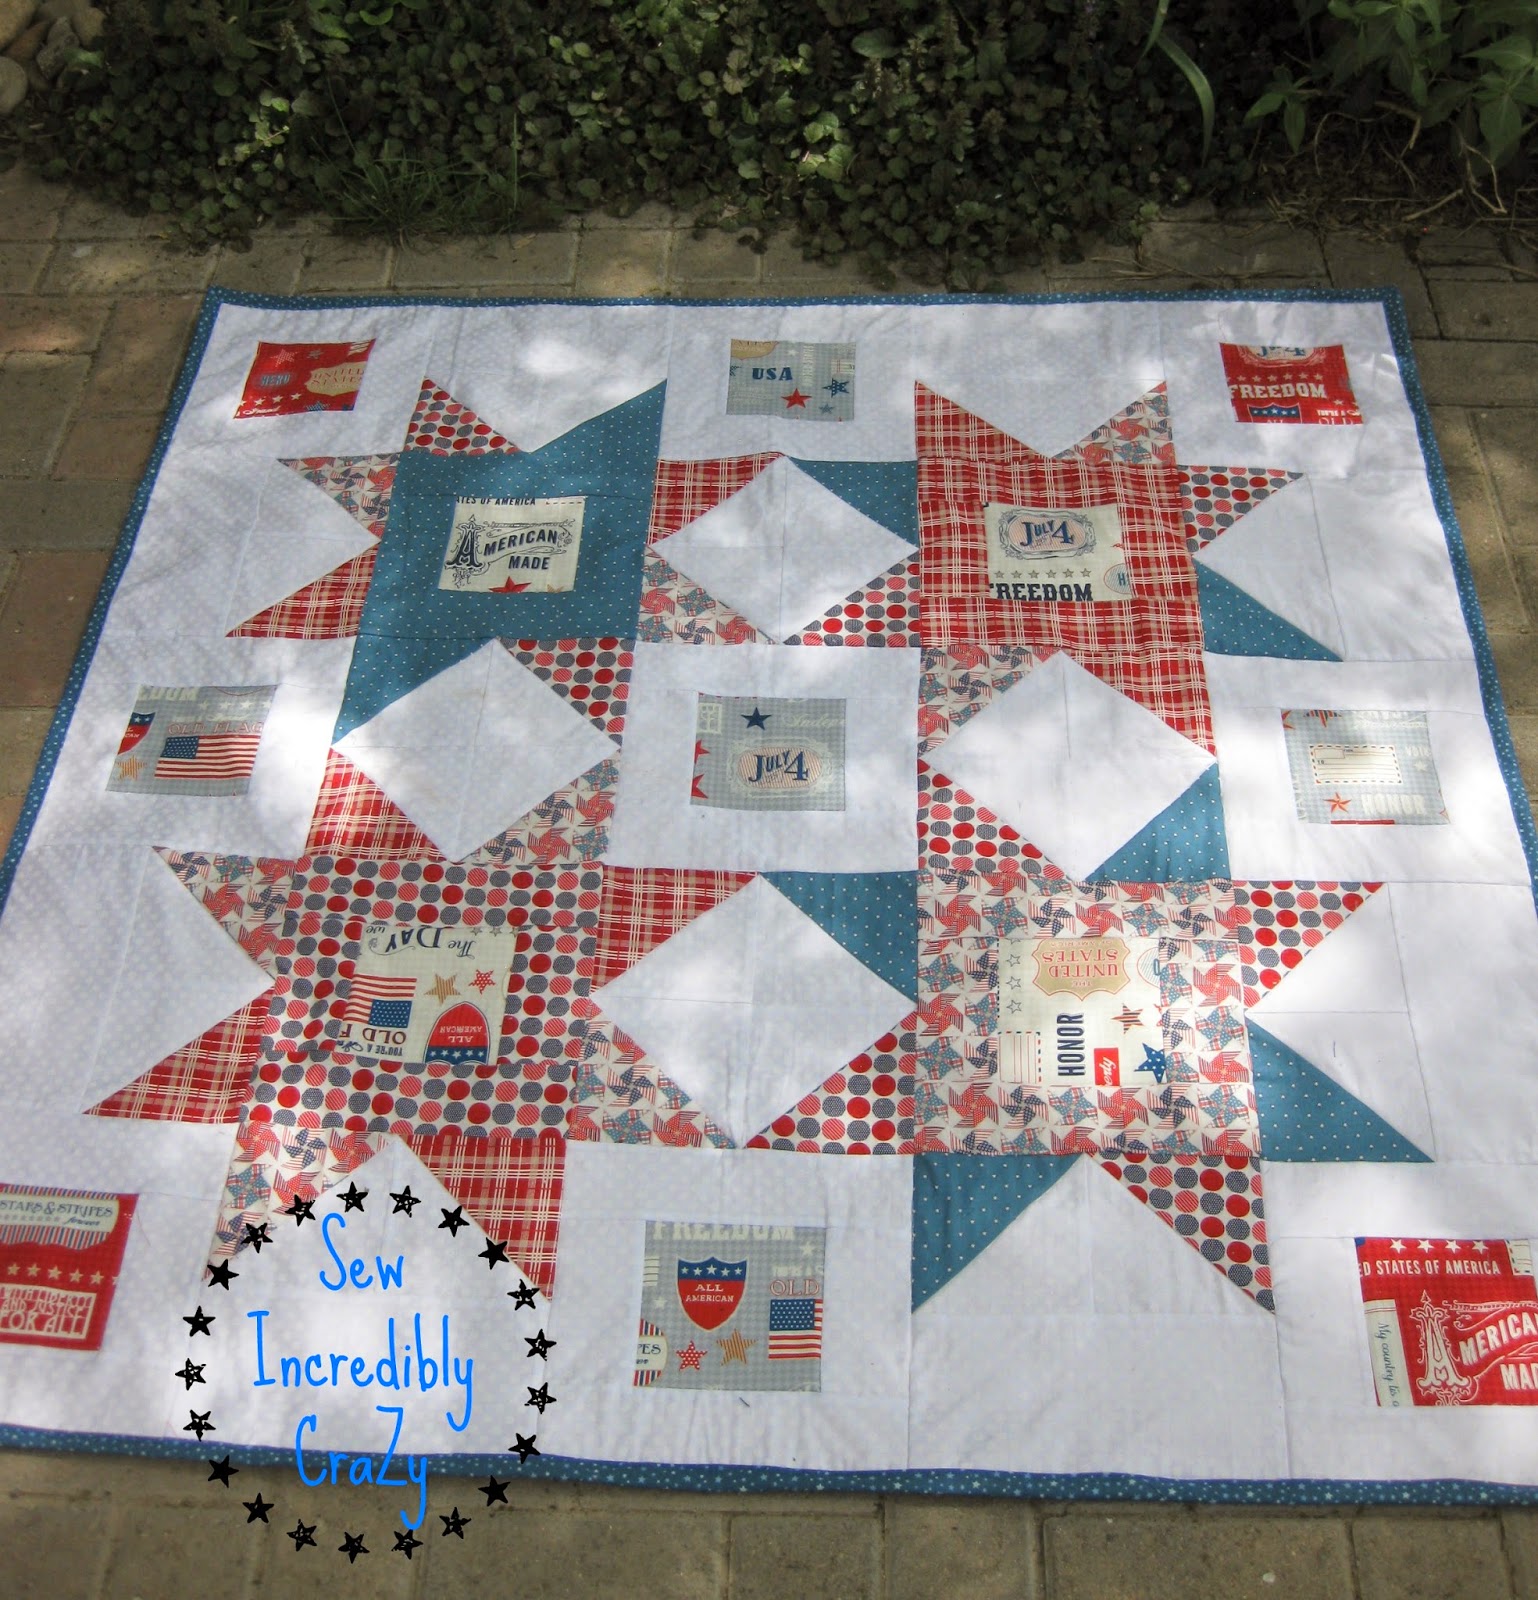 http://www.craftsy.com/pattern/quilting/home-decor/watkins-star-quilt/103680